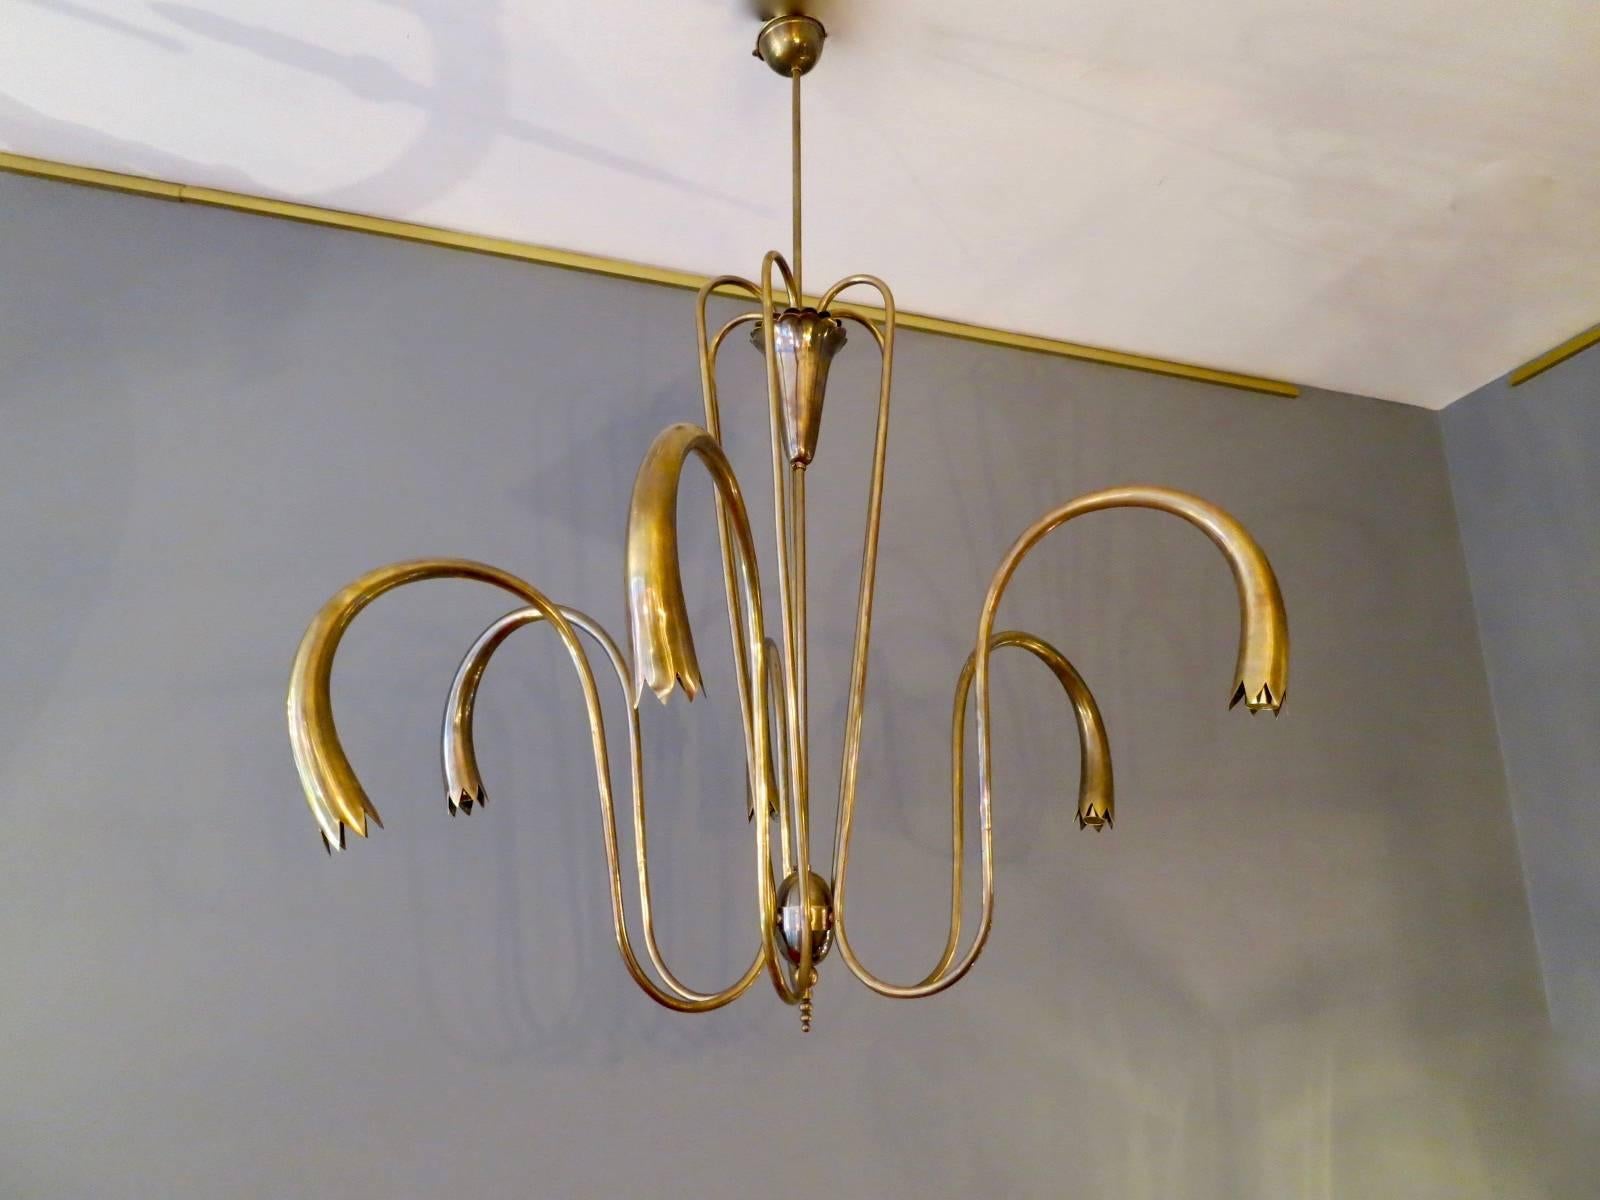 A much stylised Italian chandelier from the 1950s or possibly earlier with six trumpet shaped arms. Attributed to Arredoluce.